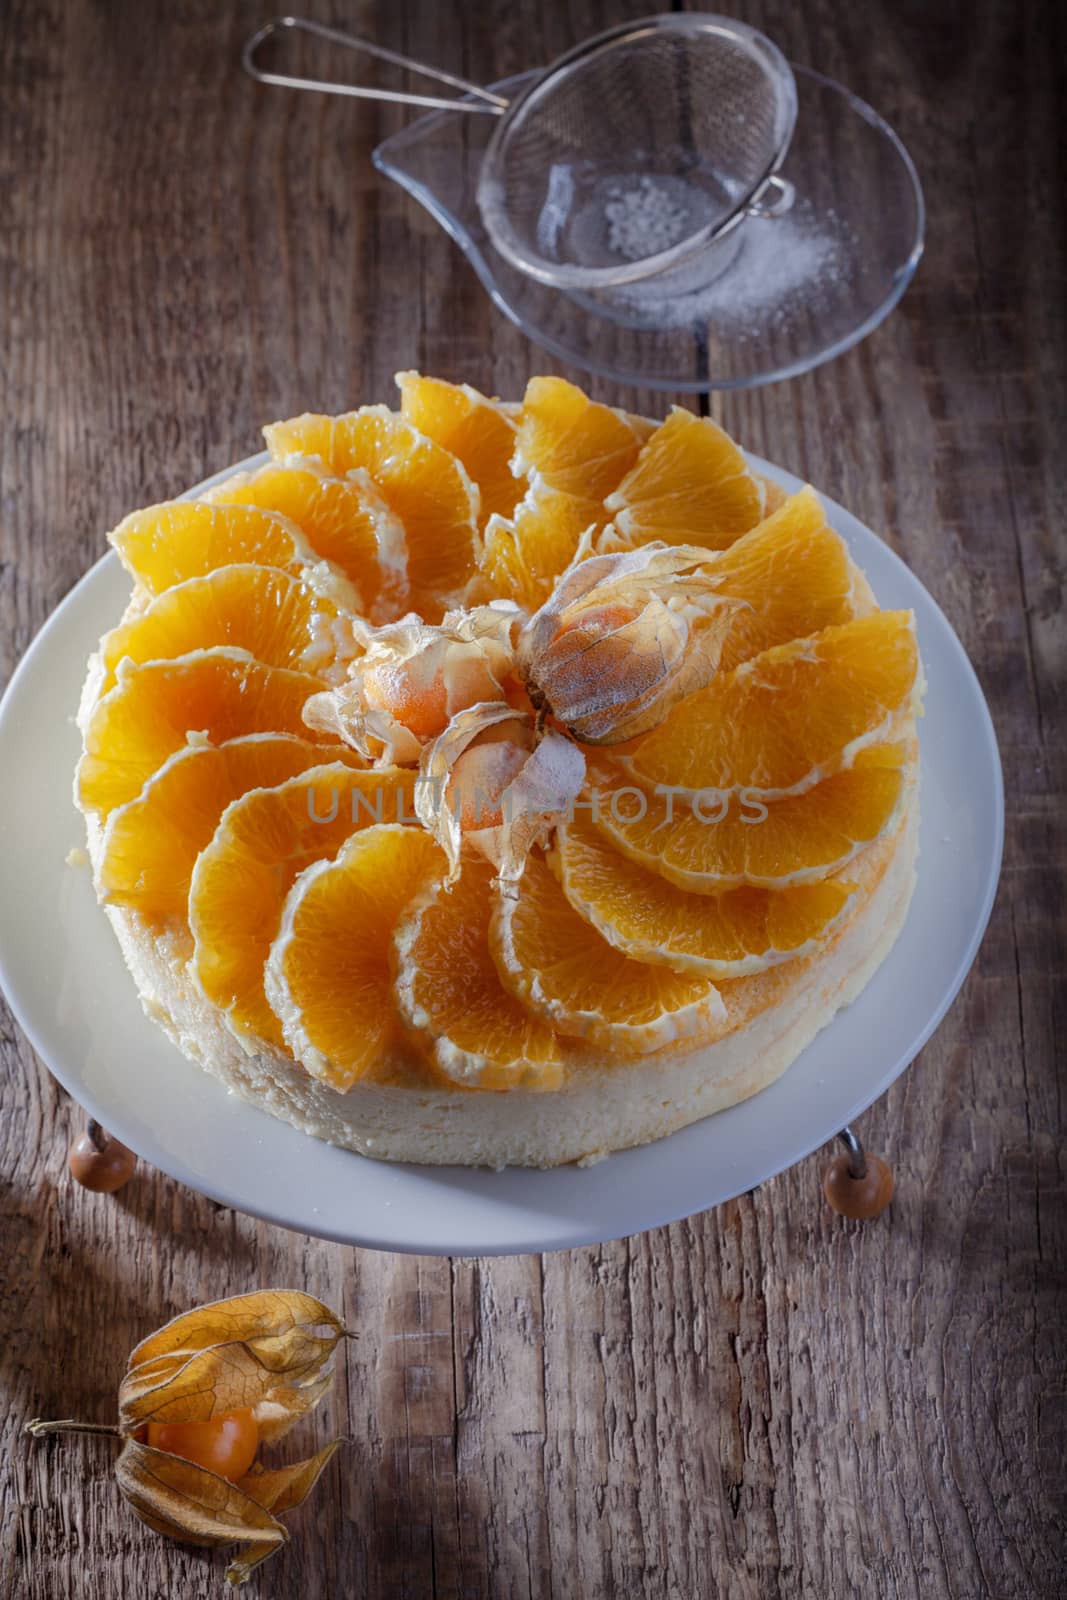 Cheesecake decorated with oranges and physalis. by supercat67